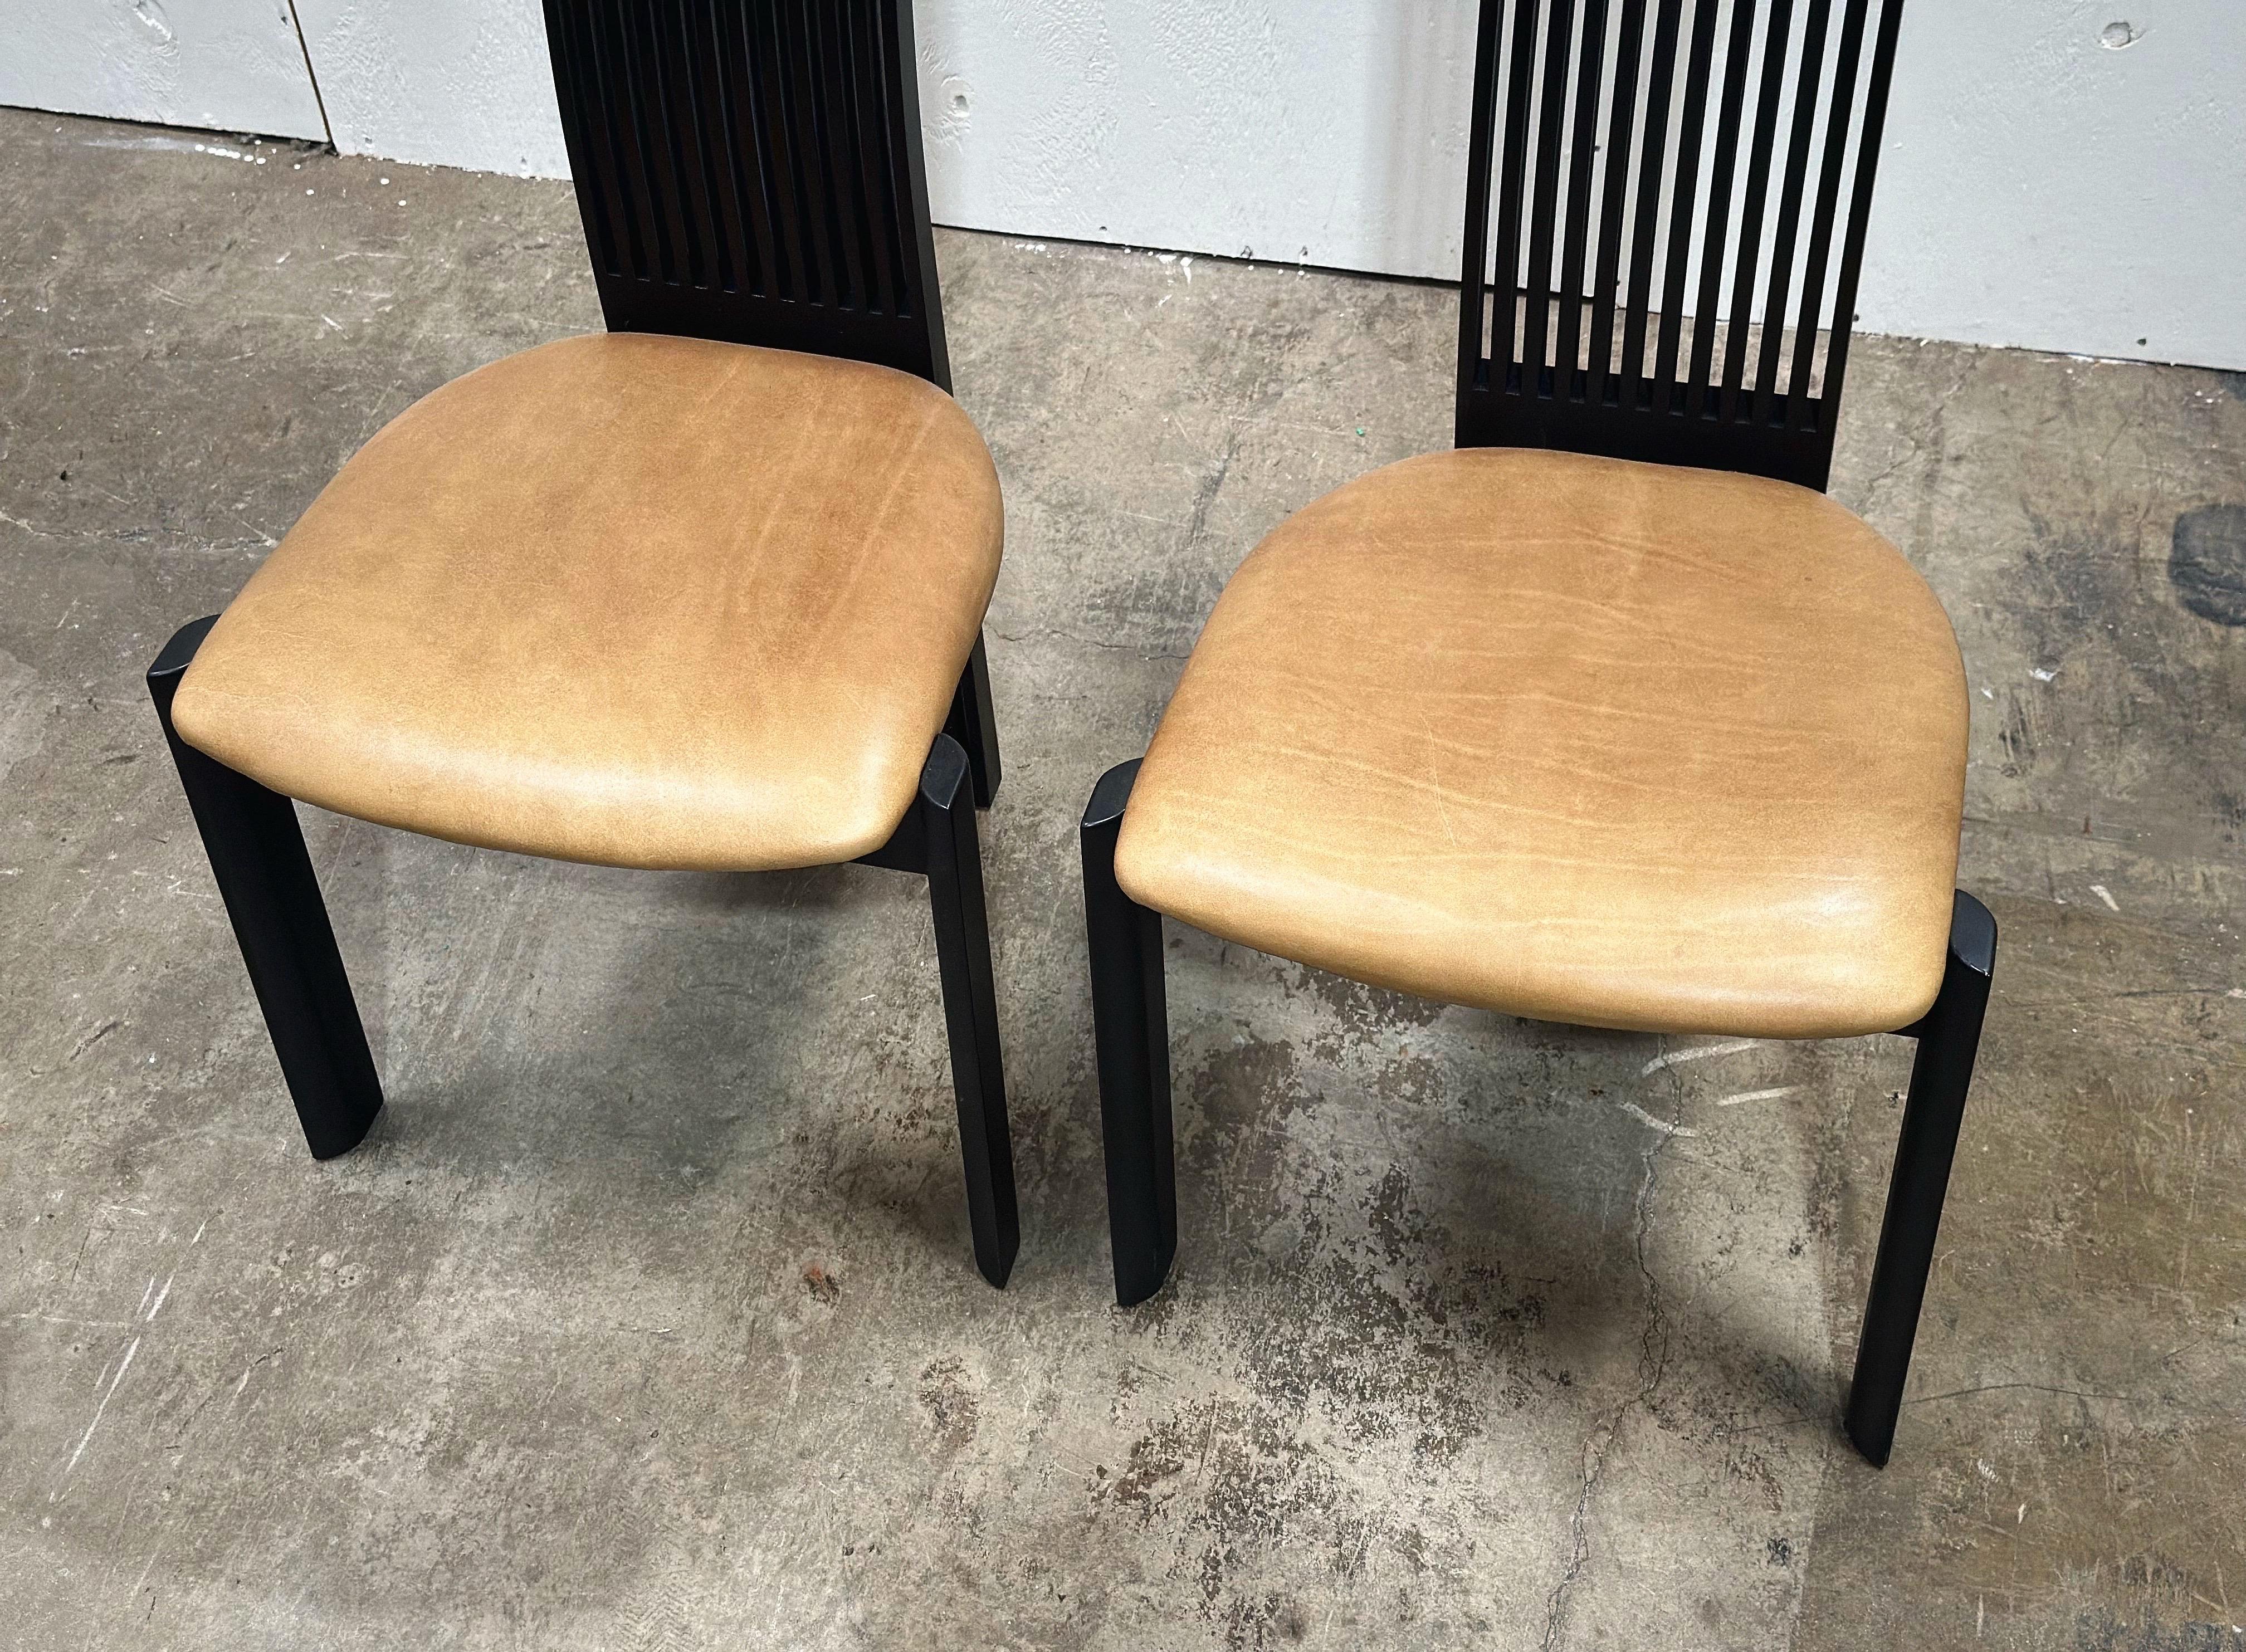 Italian Post Modern High Back Leather Dining Chairs - Pietro Consantini - One Pair (2) For Sale